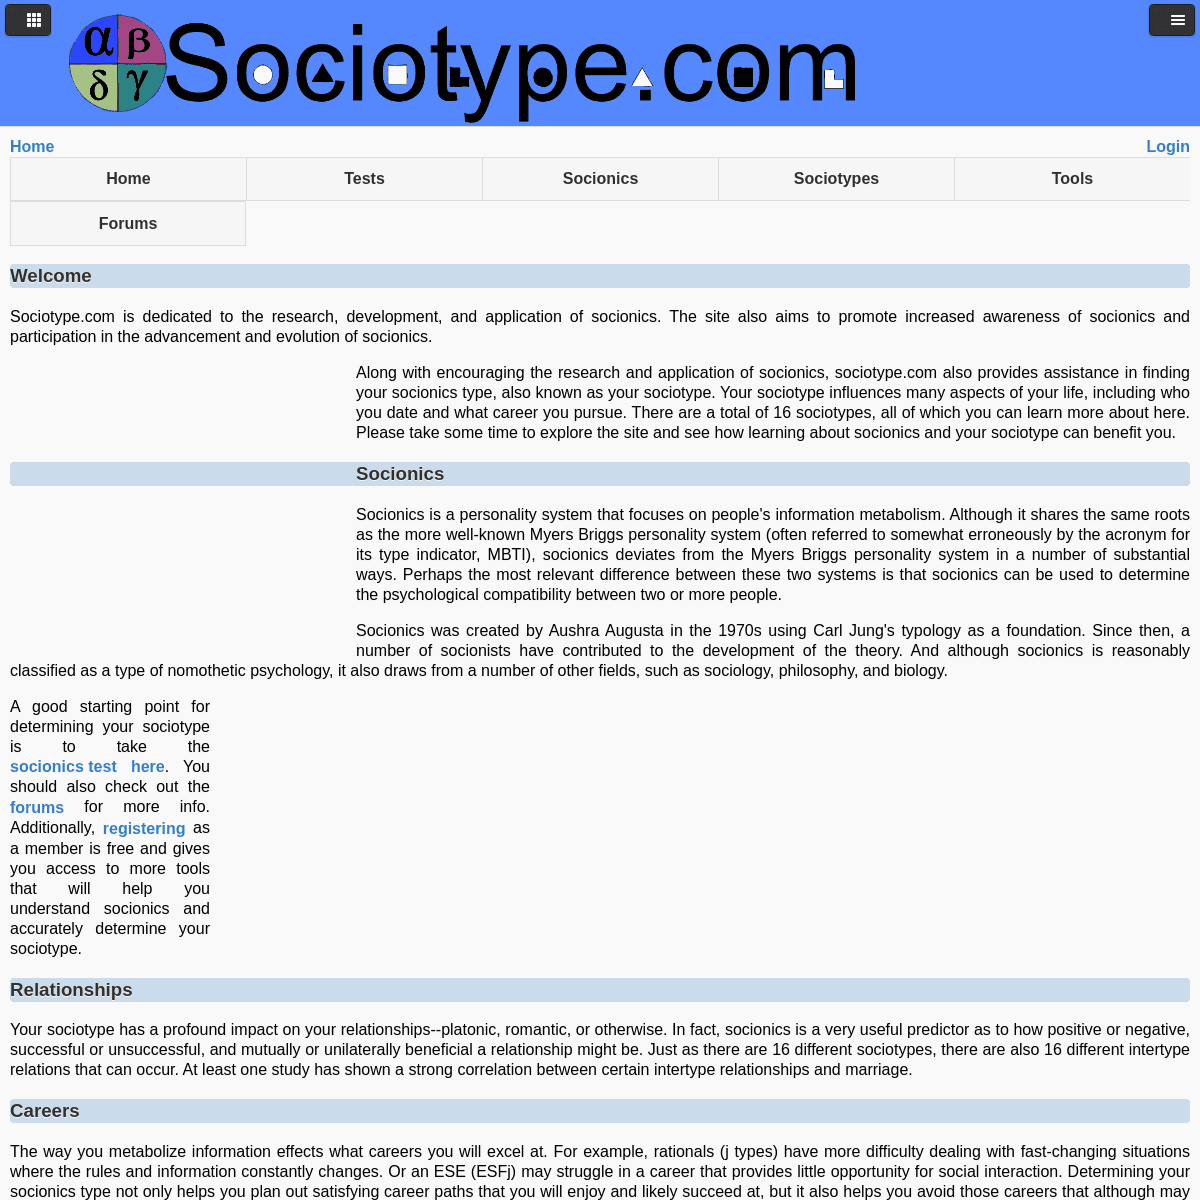 A complete backup of sociotype.com